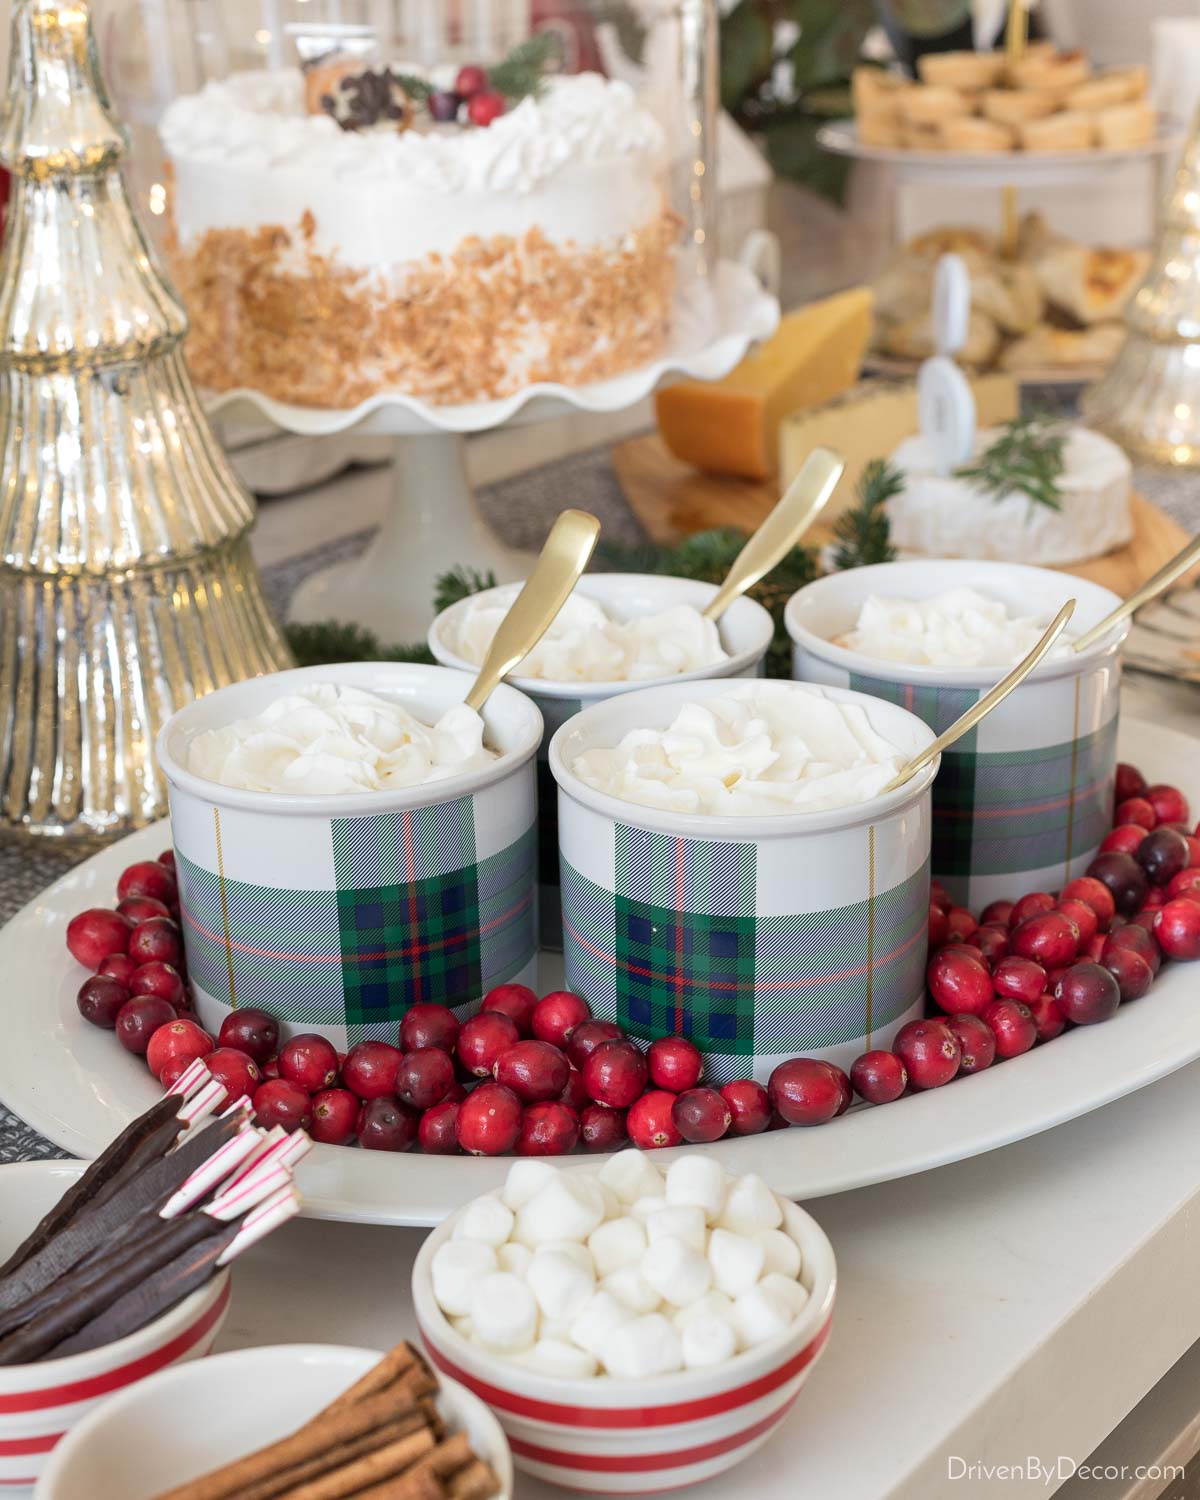 Adding color with cranberries to dress up a dessert buffet for Christmas!